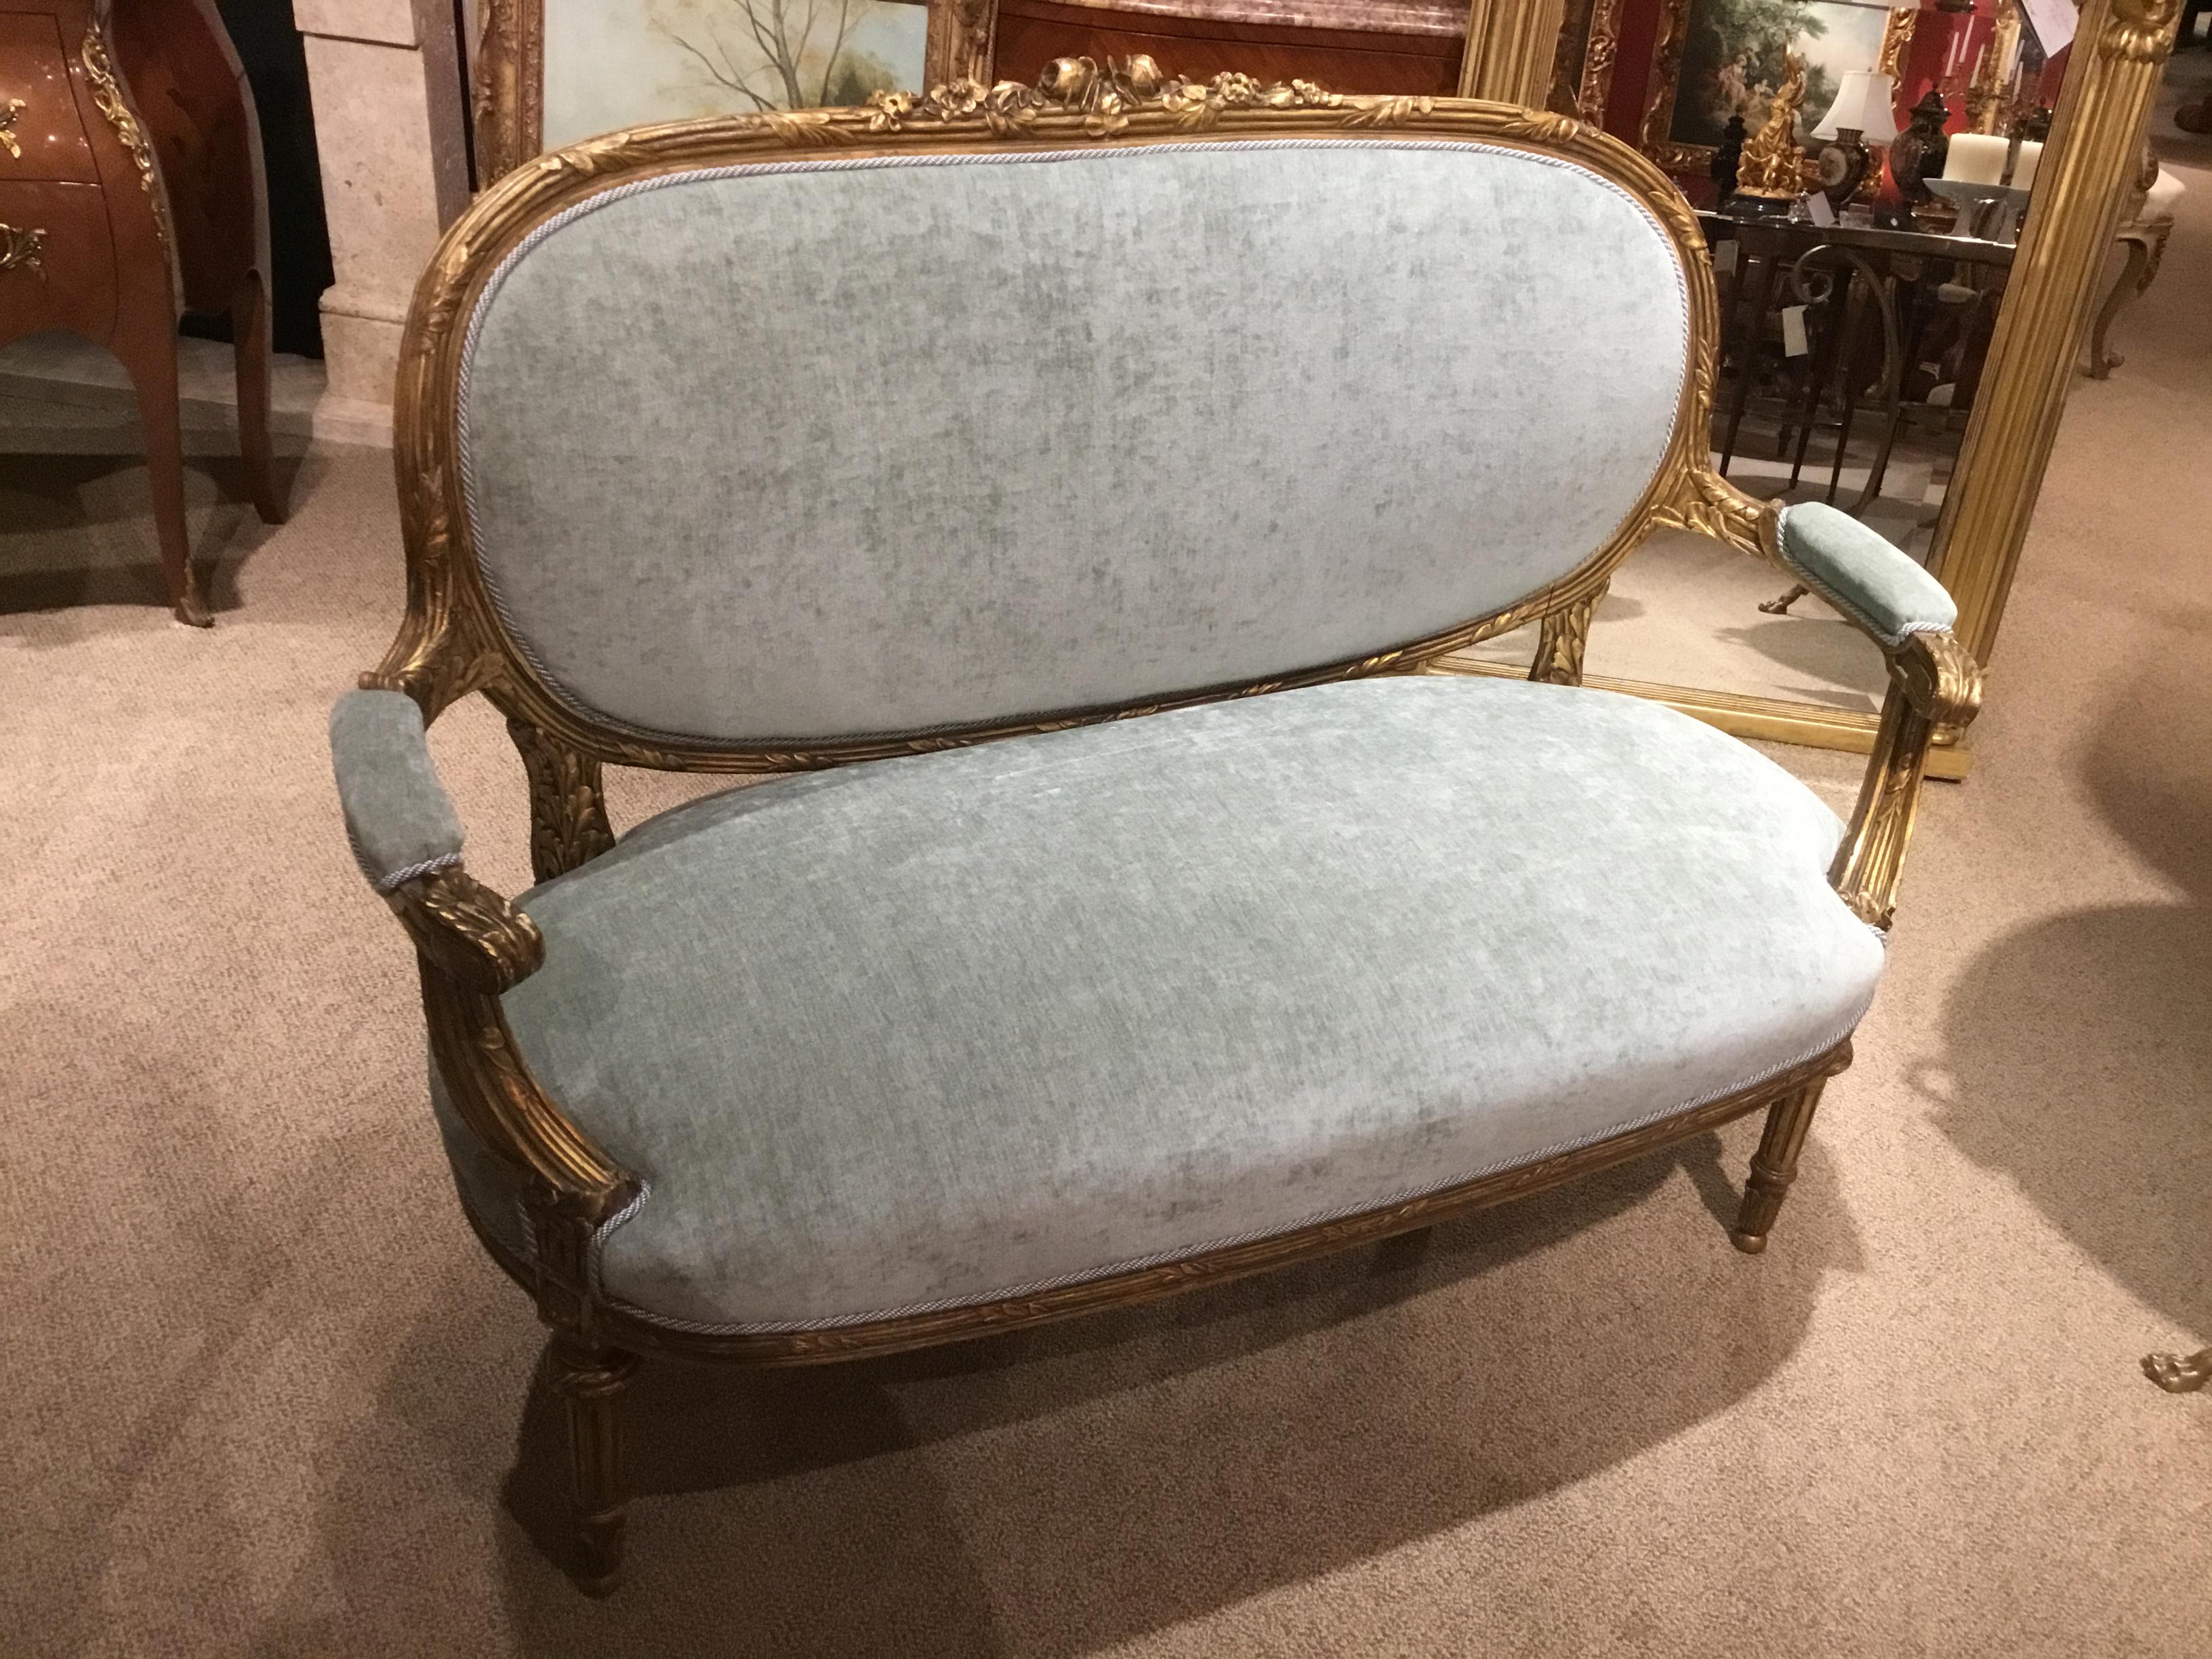 French love seat in a sea foam teal hue new upholstery. The back upholstered
In a small check of teal and white. Corded with a matching trim.
The back is gracefully curved. The center crest is carved in a rose motif.
Frame is study and tight.